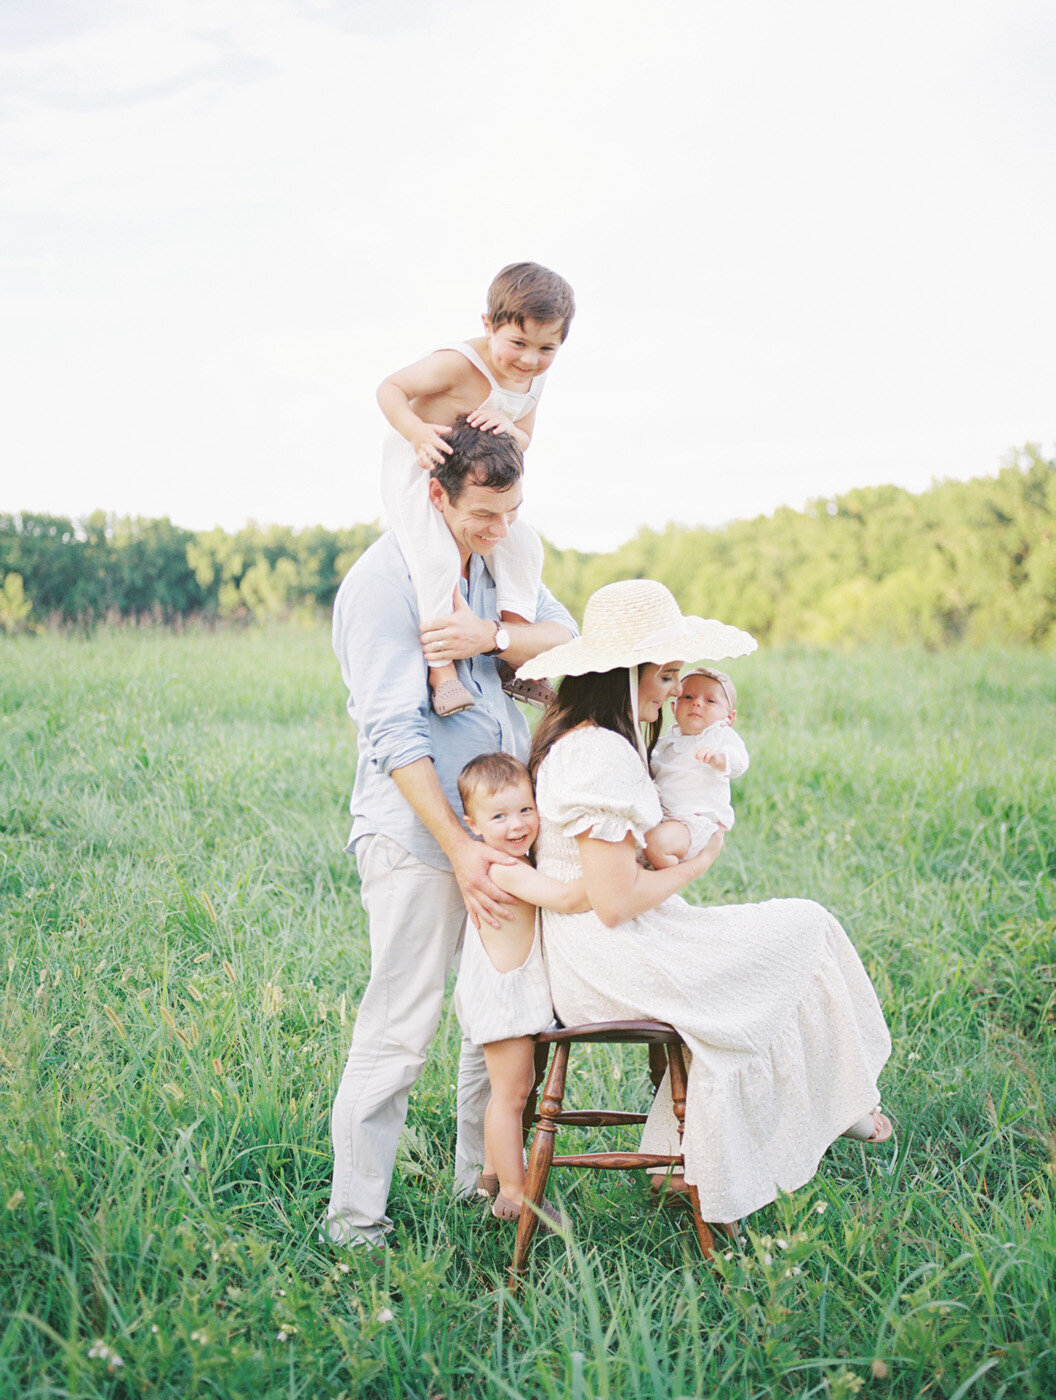 Raleigh Family Photographer | Jessica Agee Photography - 021